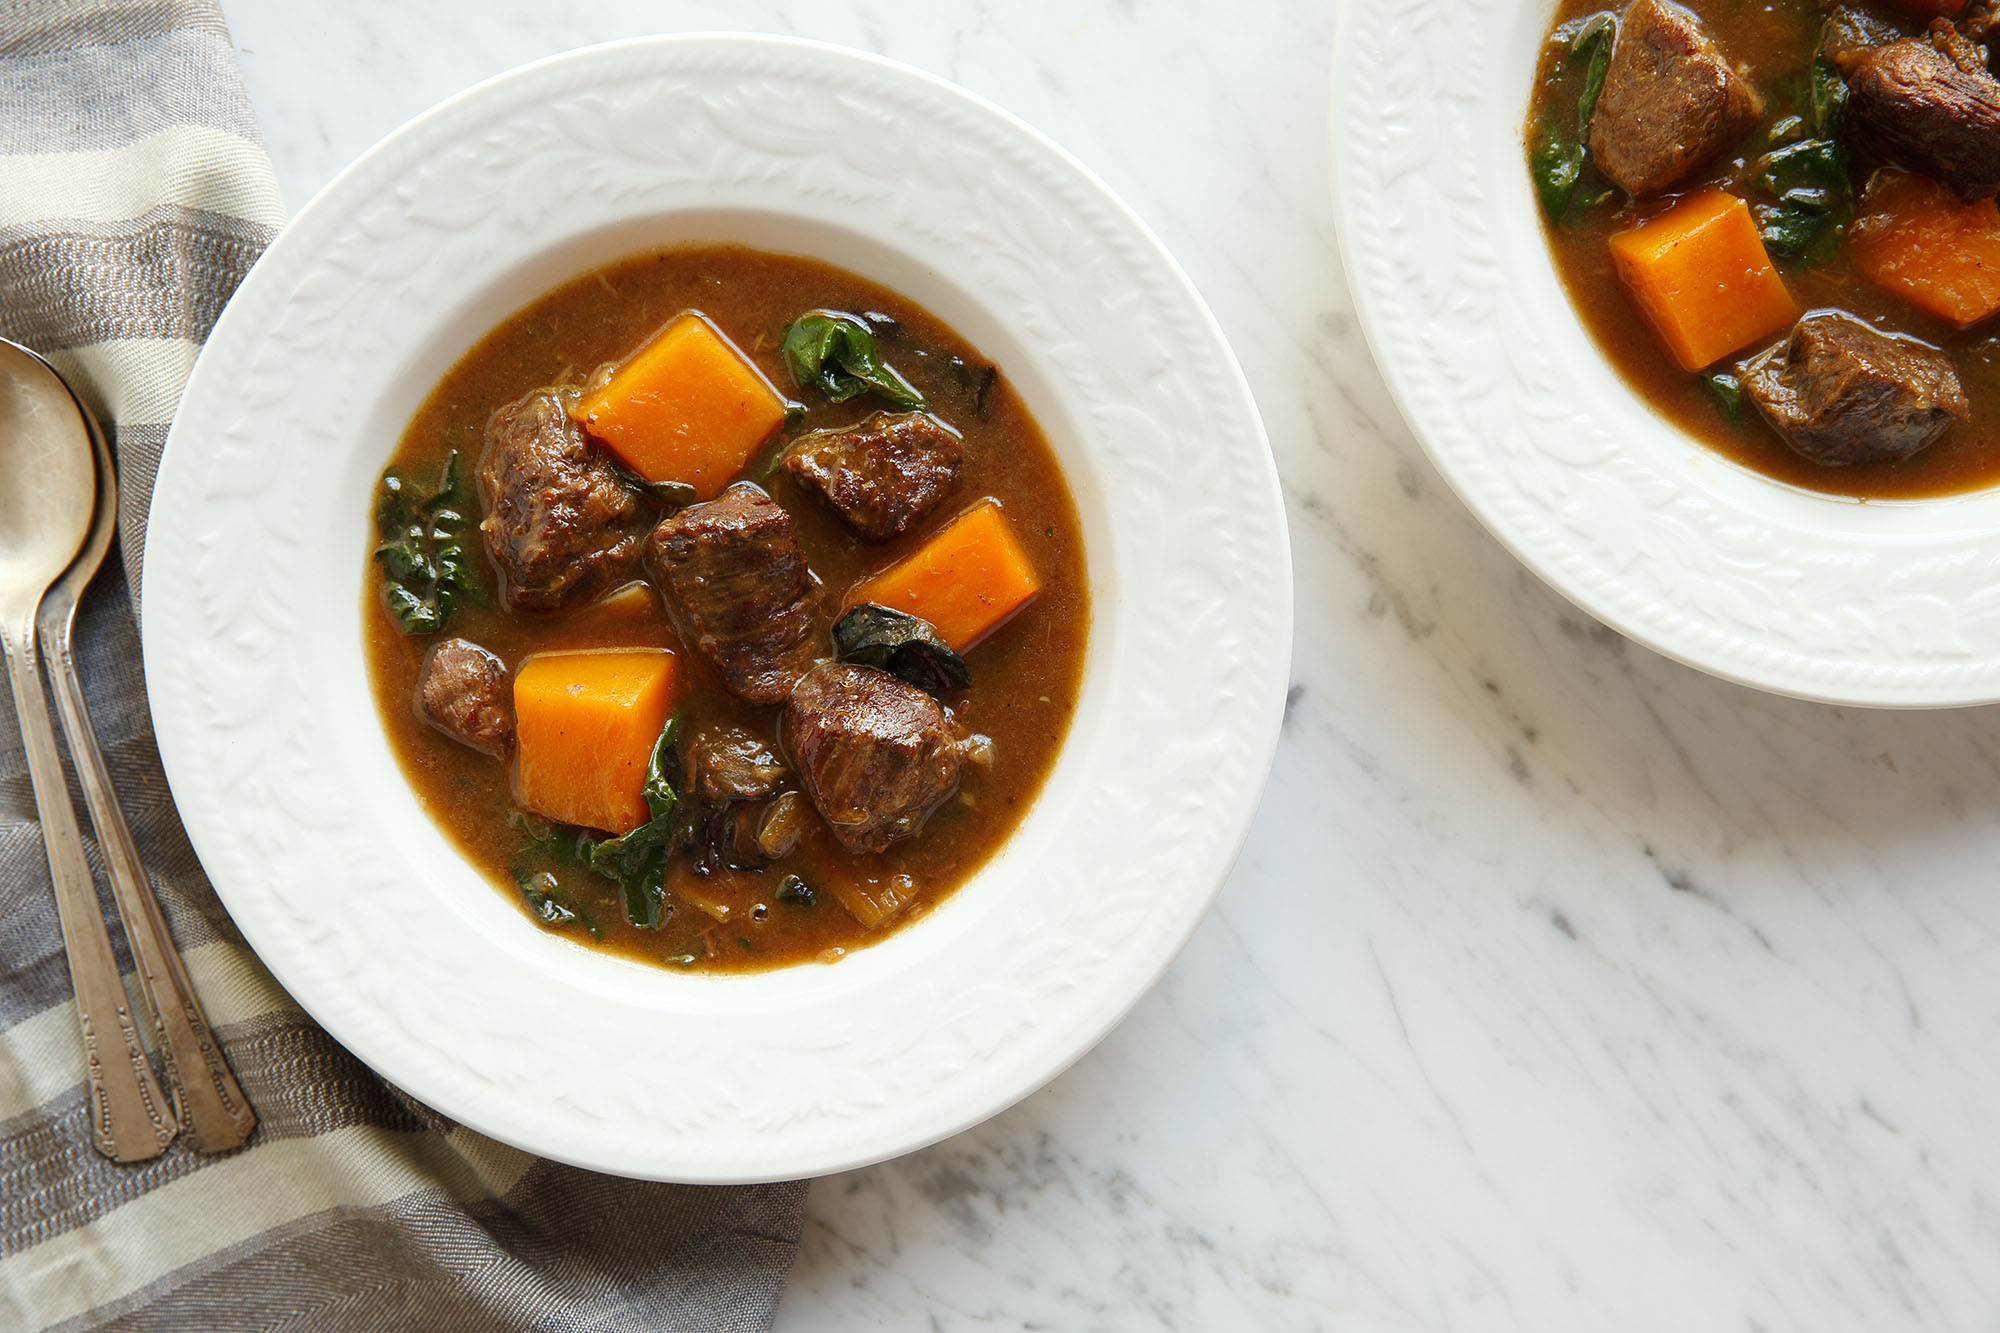 Made with American Lamb stew meat in your slow cooker, it's seasoned with chard, onion, garlic, cardamom and pepper. After cooking for a short time, you add squash, apple cider, a cinnamon stick, bay leaf and cloves to simmer for 6-8 hours. 